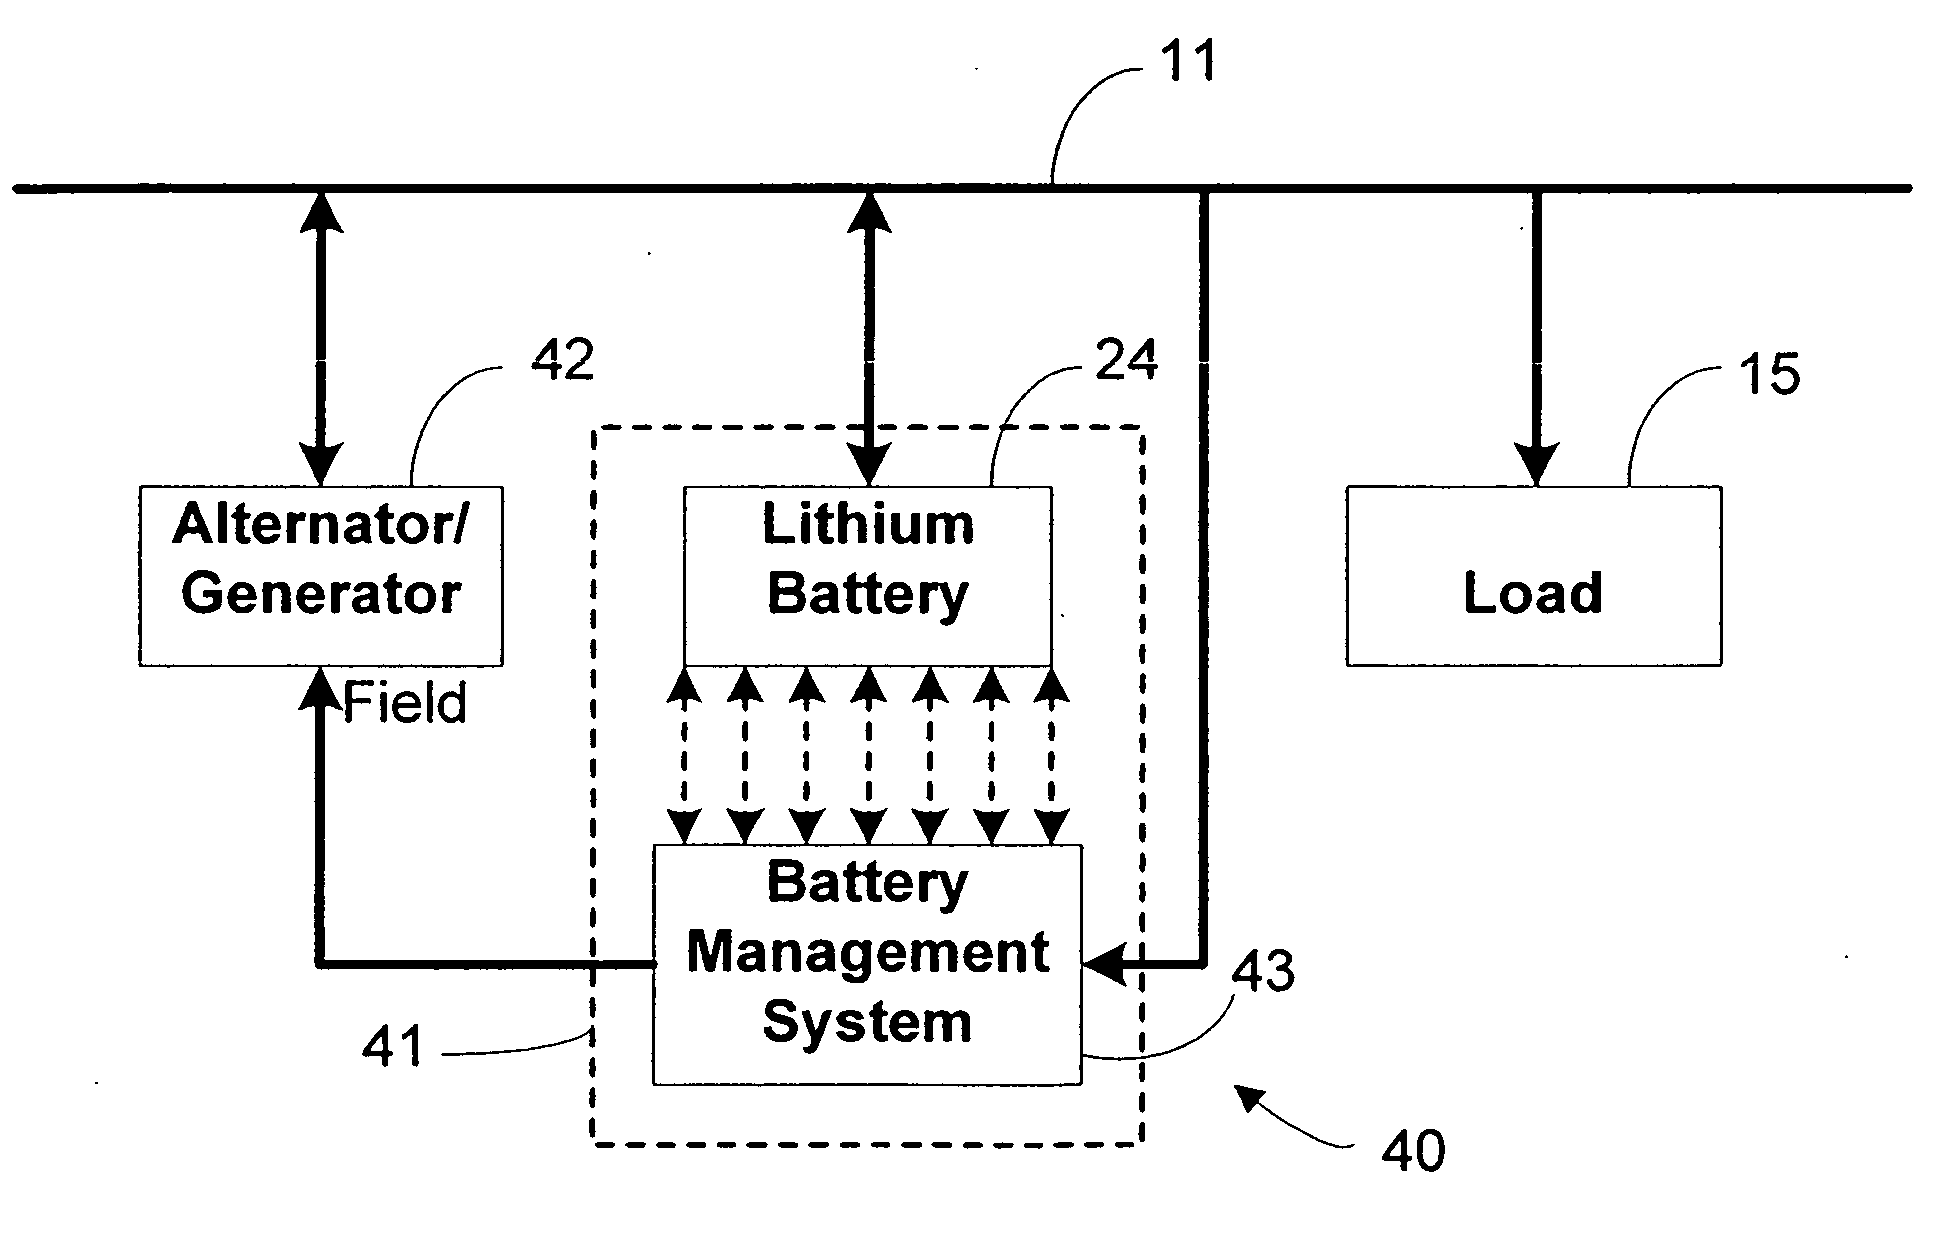 Lithium battery system